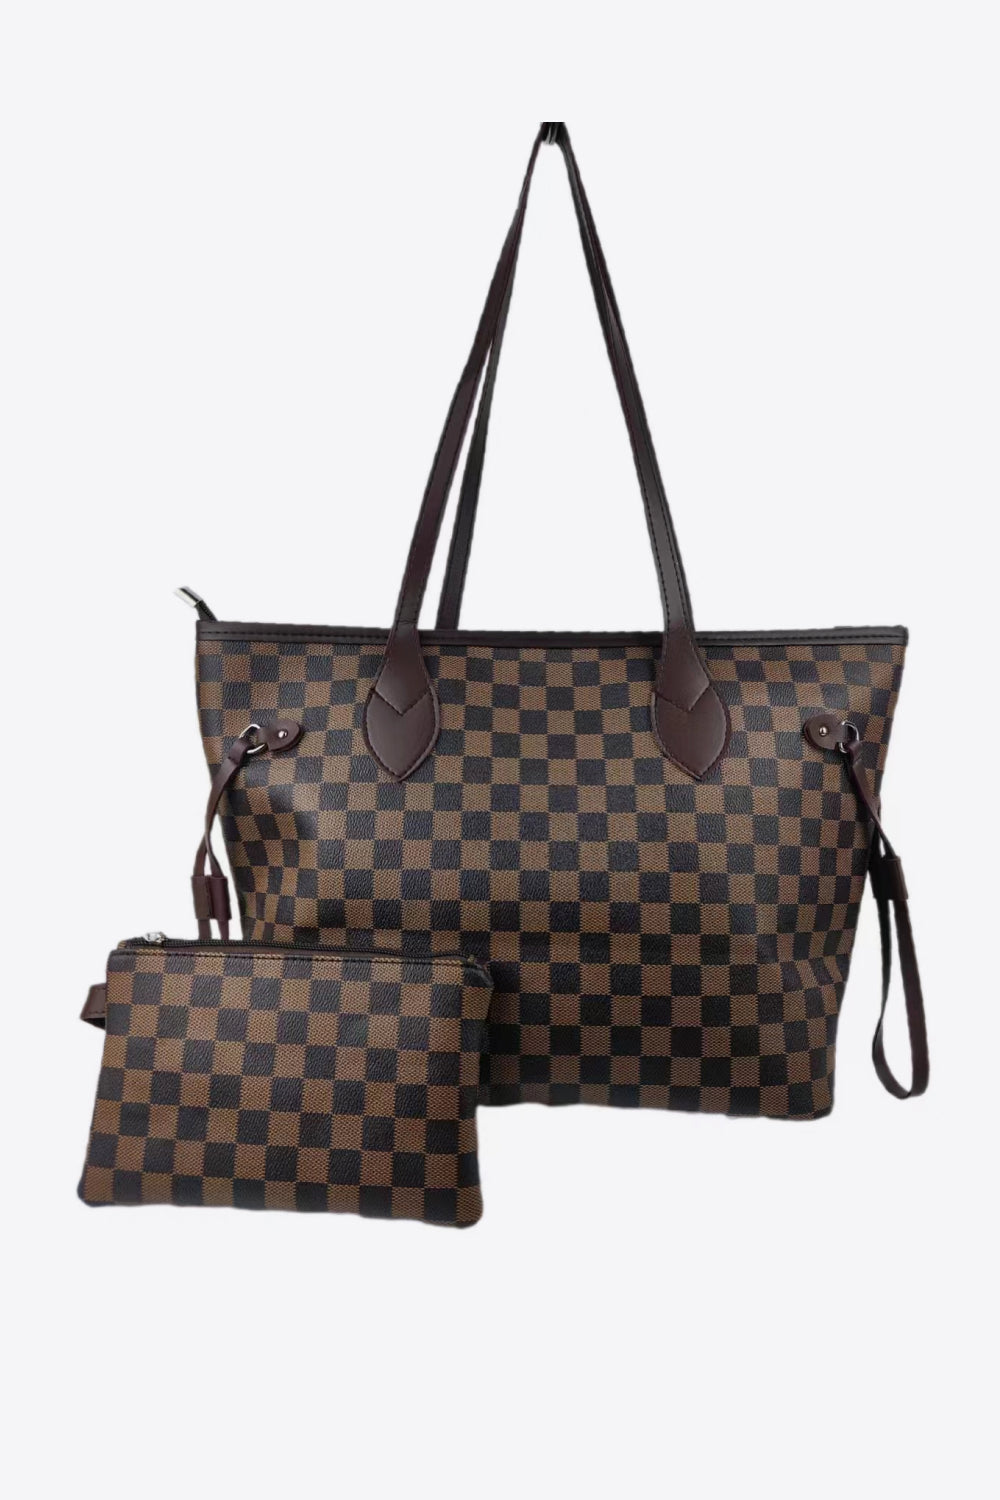 Checkered PVC Two-Piece Bag Set - Tote - Wild Willows Boutique - Massapequa, NY, affordable and fashionable clothing for women of all ages. Bottoms, tops, dresses, intimates, outerwear, sweater, shoes, accessories, jewelry, active wear, and more // Wild Willow Boutique.